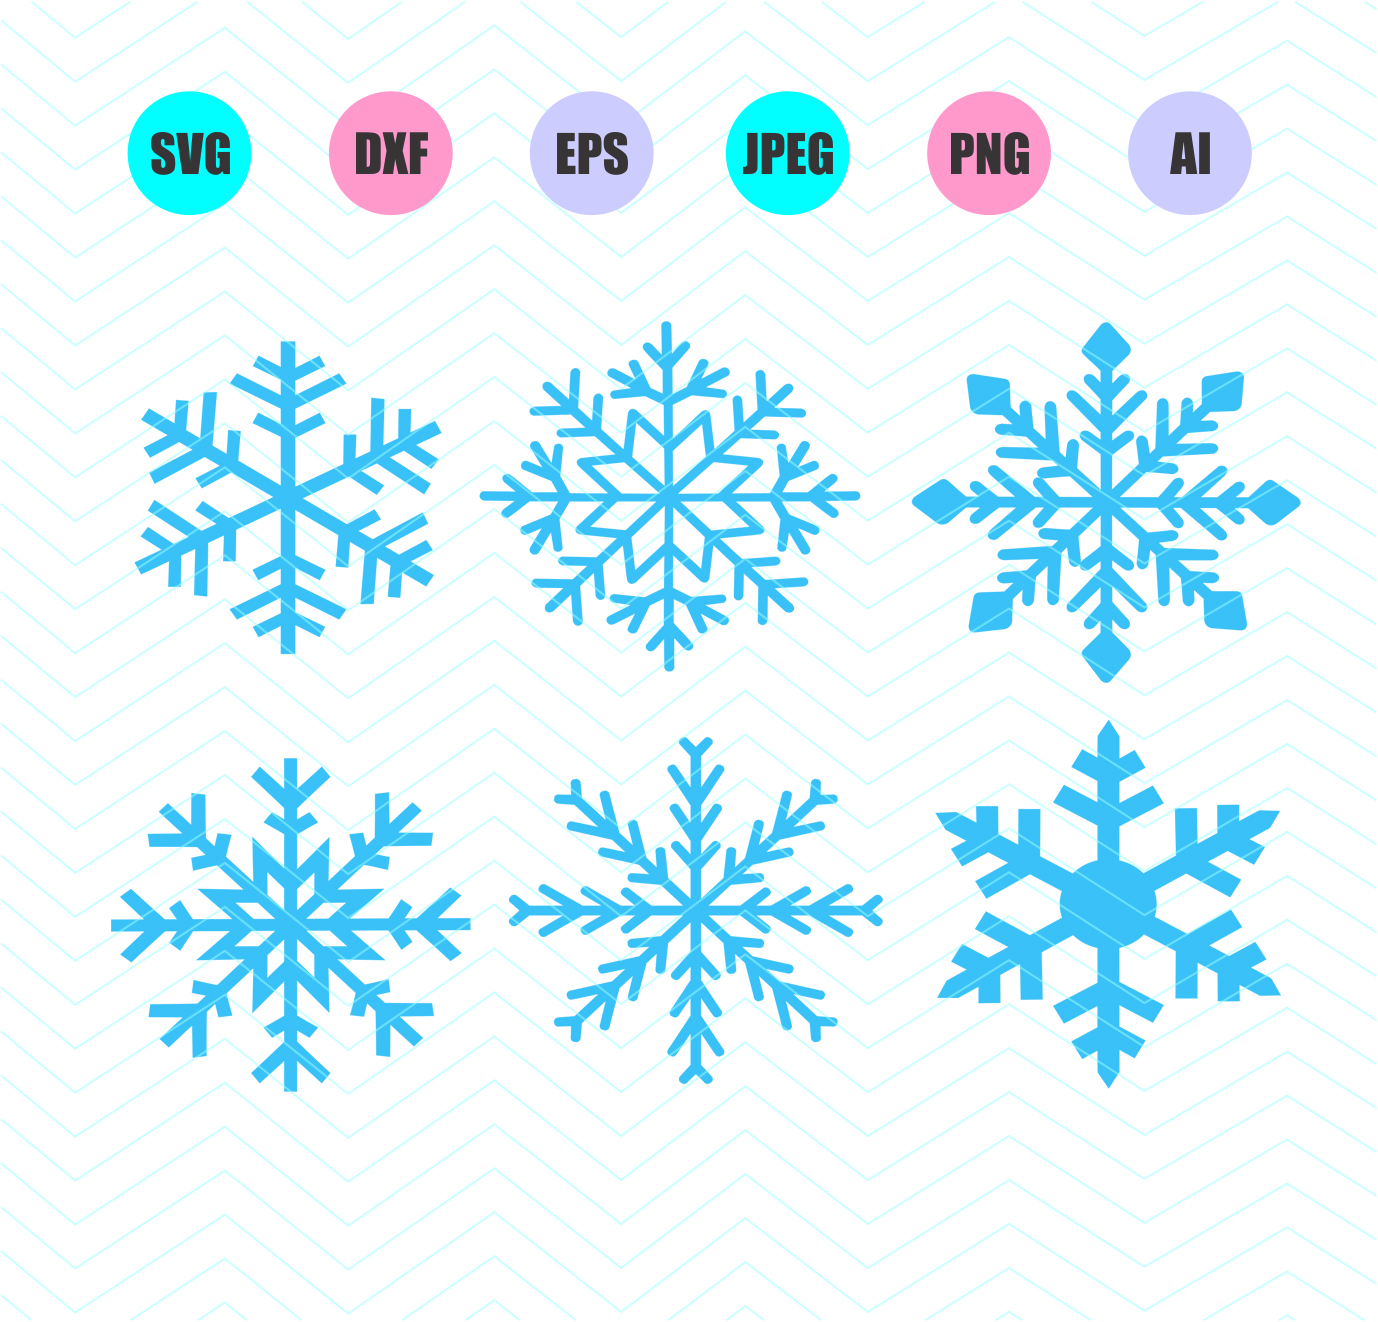 Download Snowflake Svg Dxf Eps Png Jpg Ai Cut Vector File ...